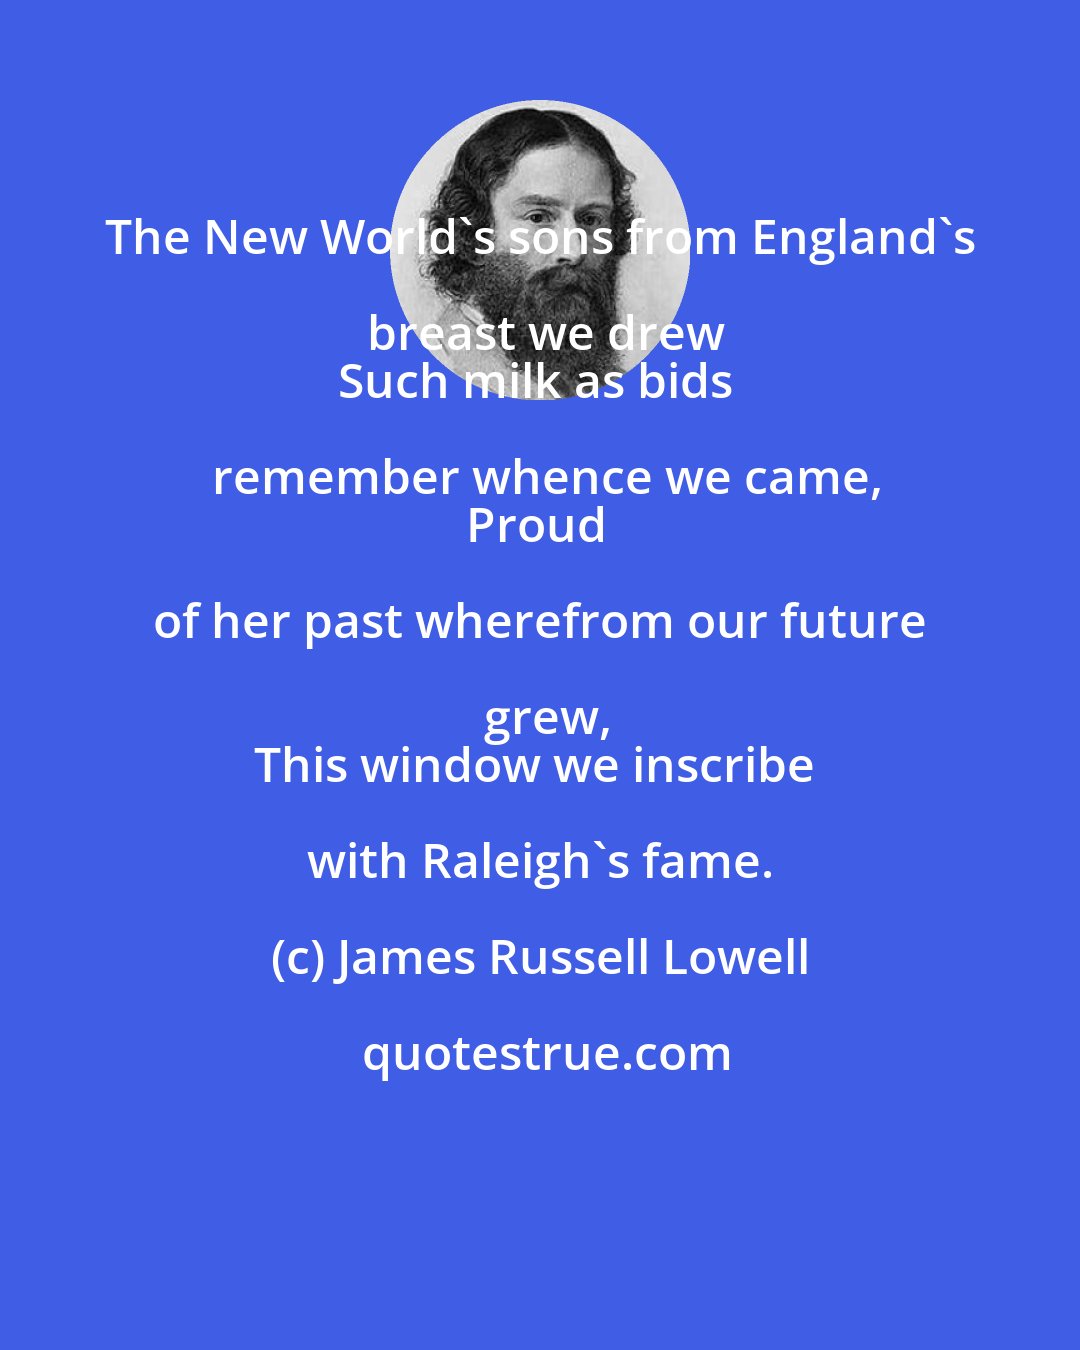 James Russell Lowell: The New World's sons from England's breast we drew
Such milk as bids remember whence we came,
Proud of her past wherefrom our future grew,
This window we inscribe with Raleigh's fame.